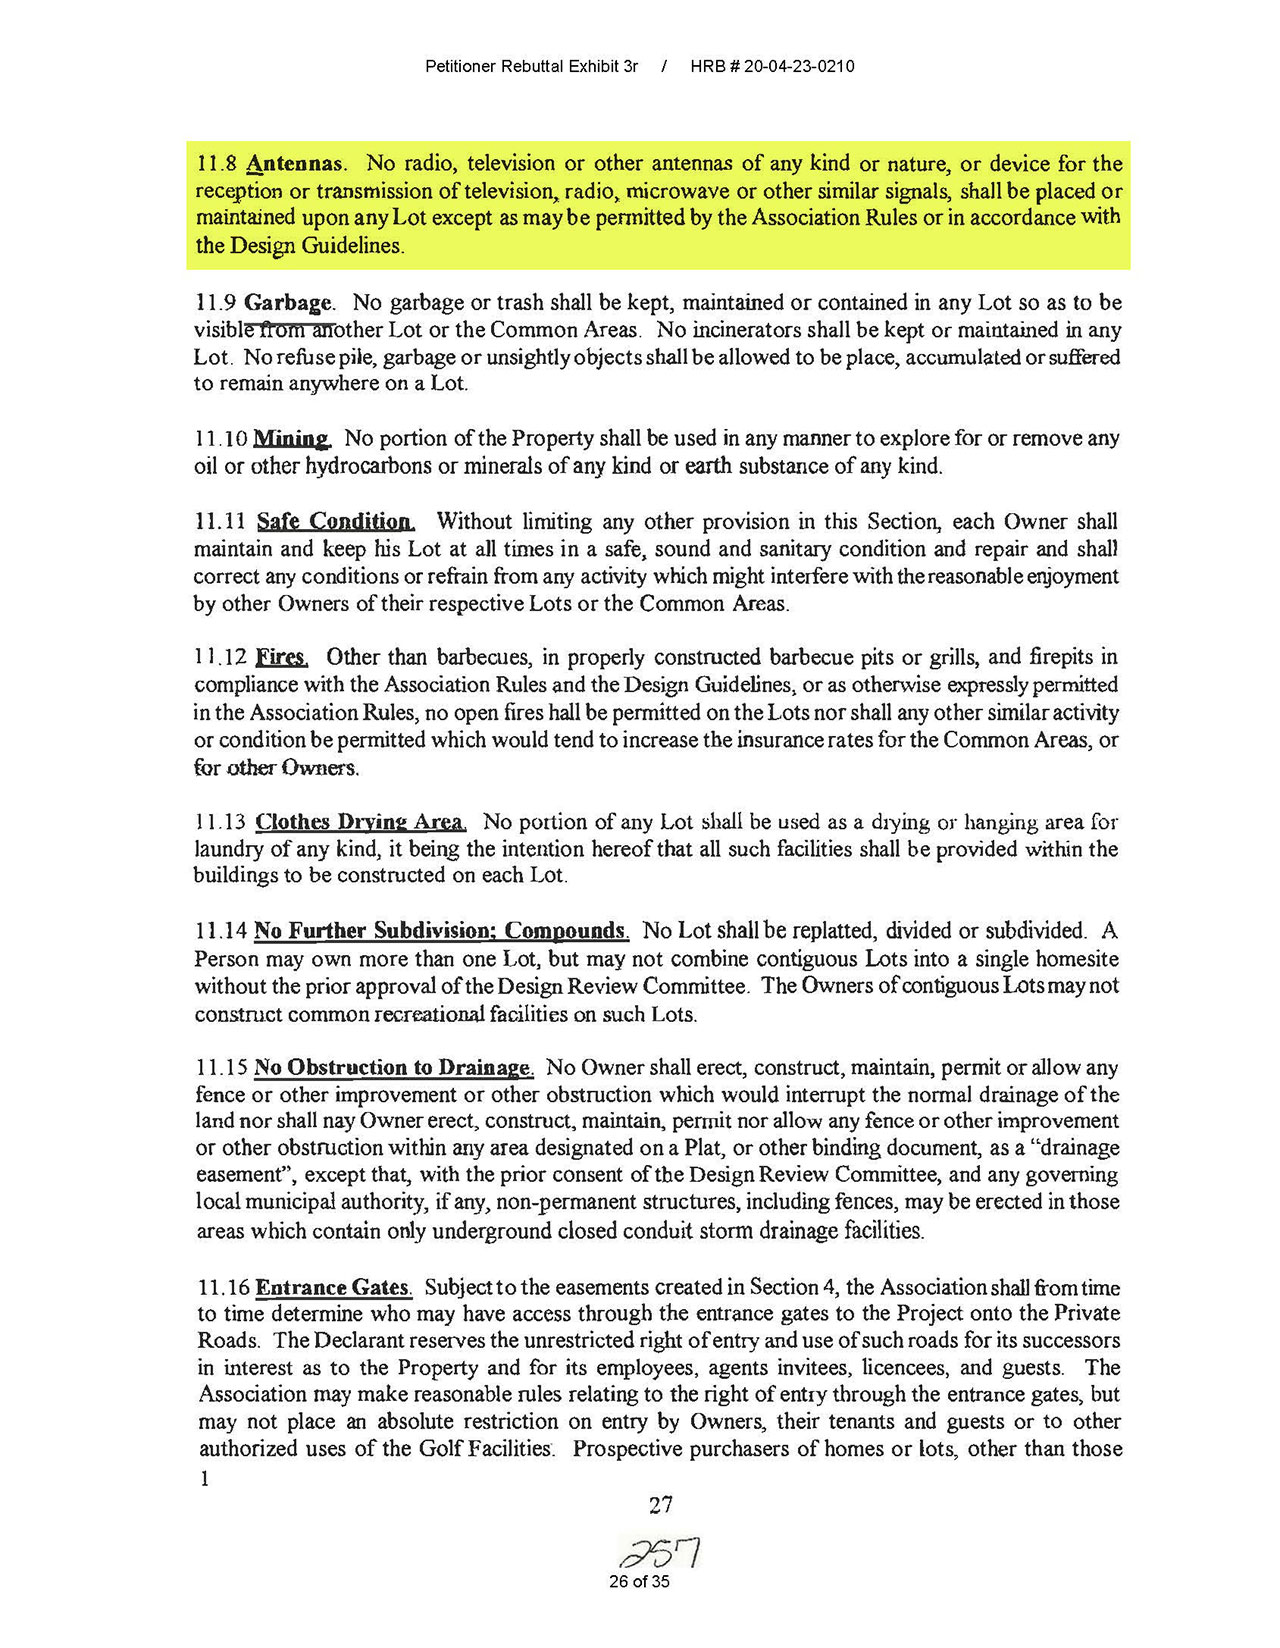 EMHA Covenants, page 26, Rule 11.8 ANTENNAS.